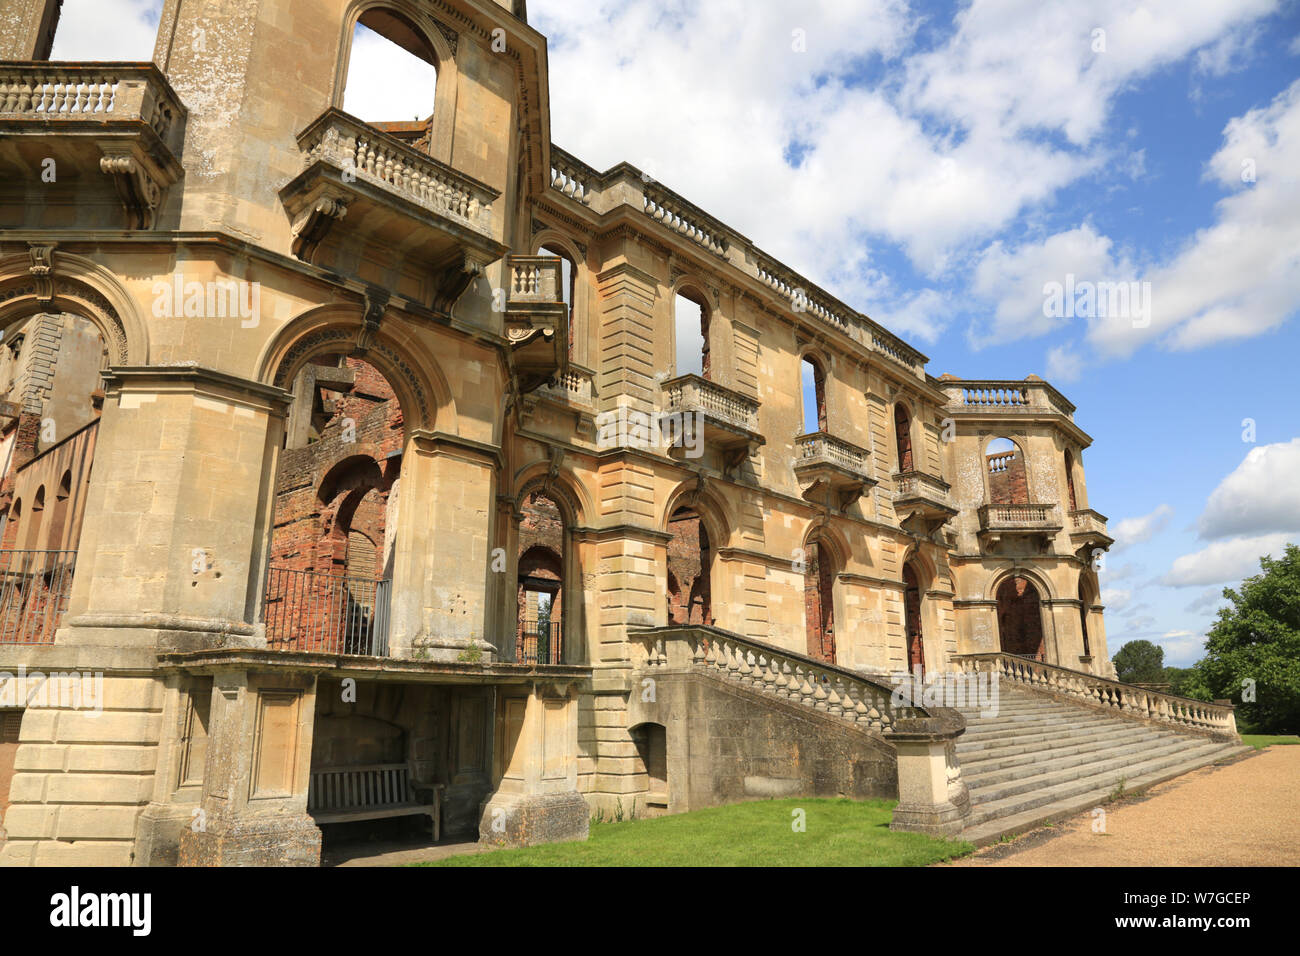 The ruins of Witley court, Great Witley, Worcestershire, England, UK. Stock Photo